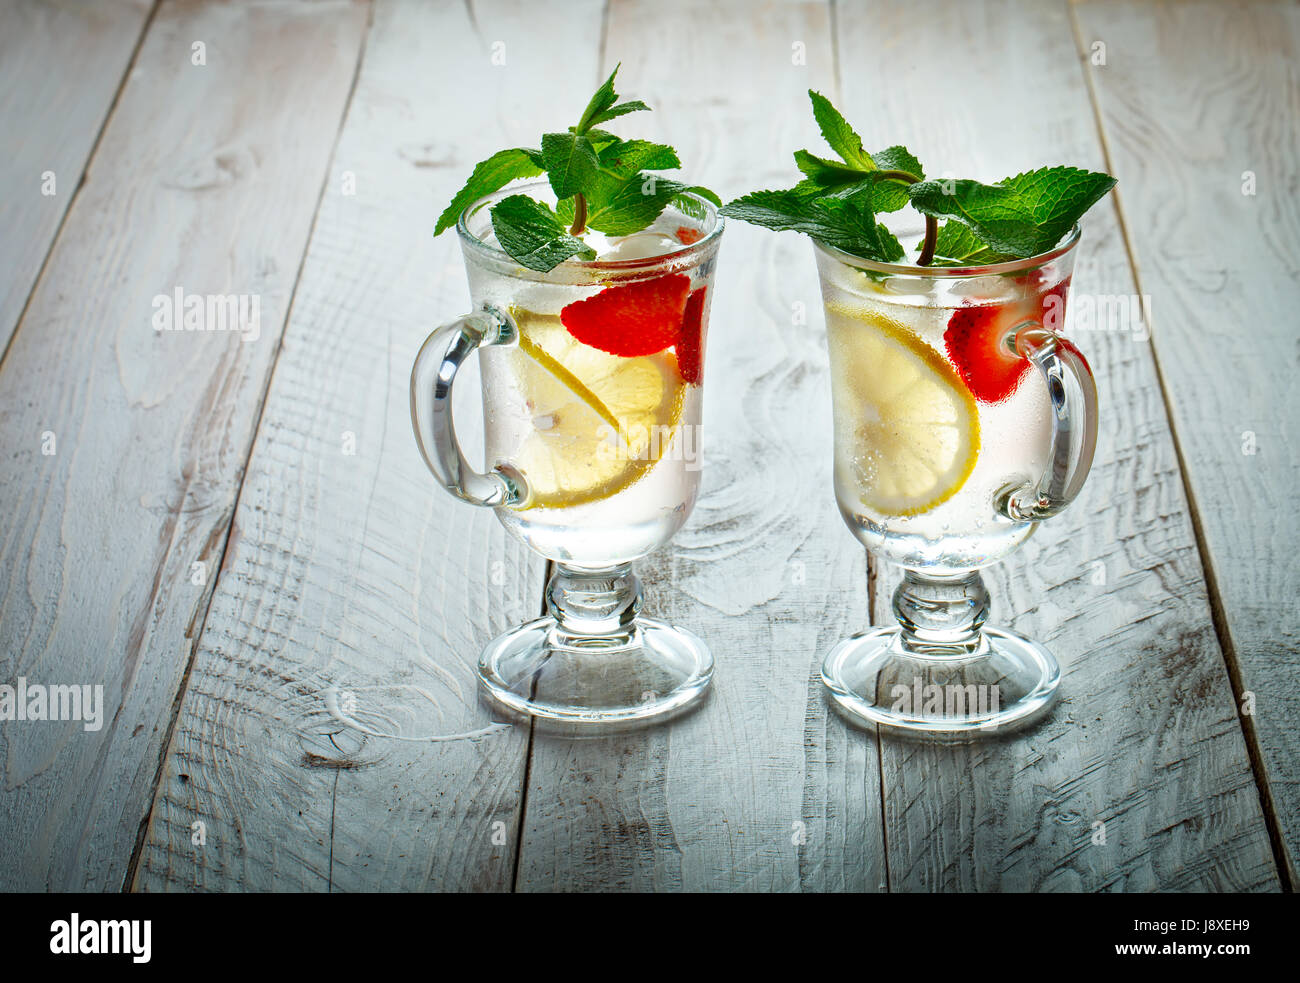 Fresh summer healthy drink with lemon and strawberries with ice. Stock Photo